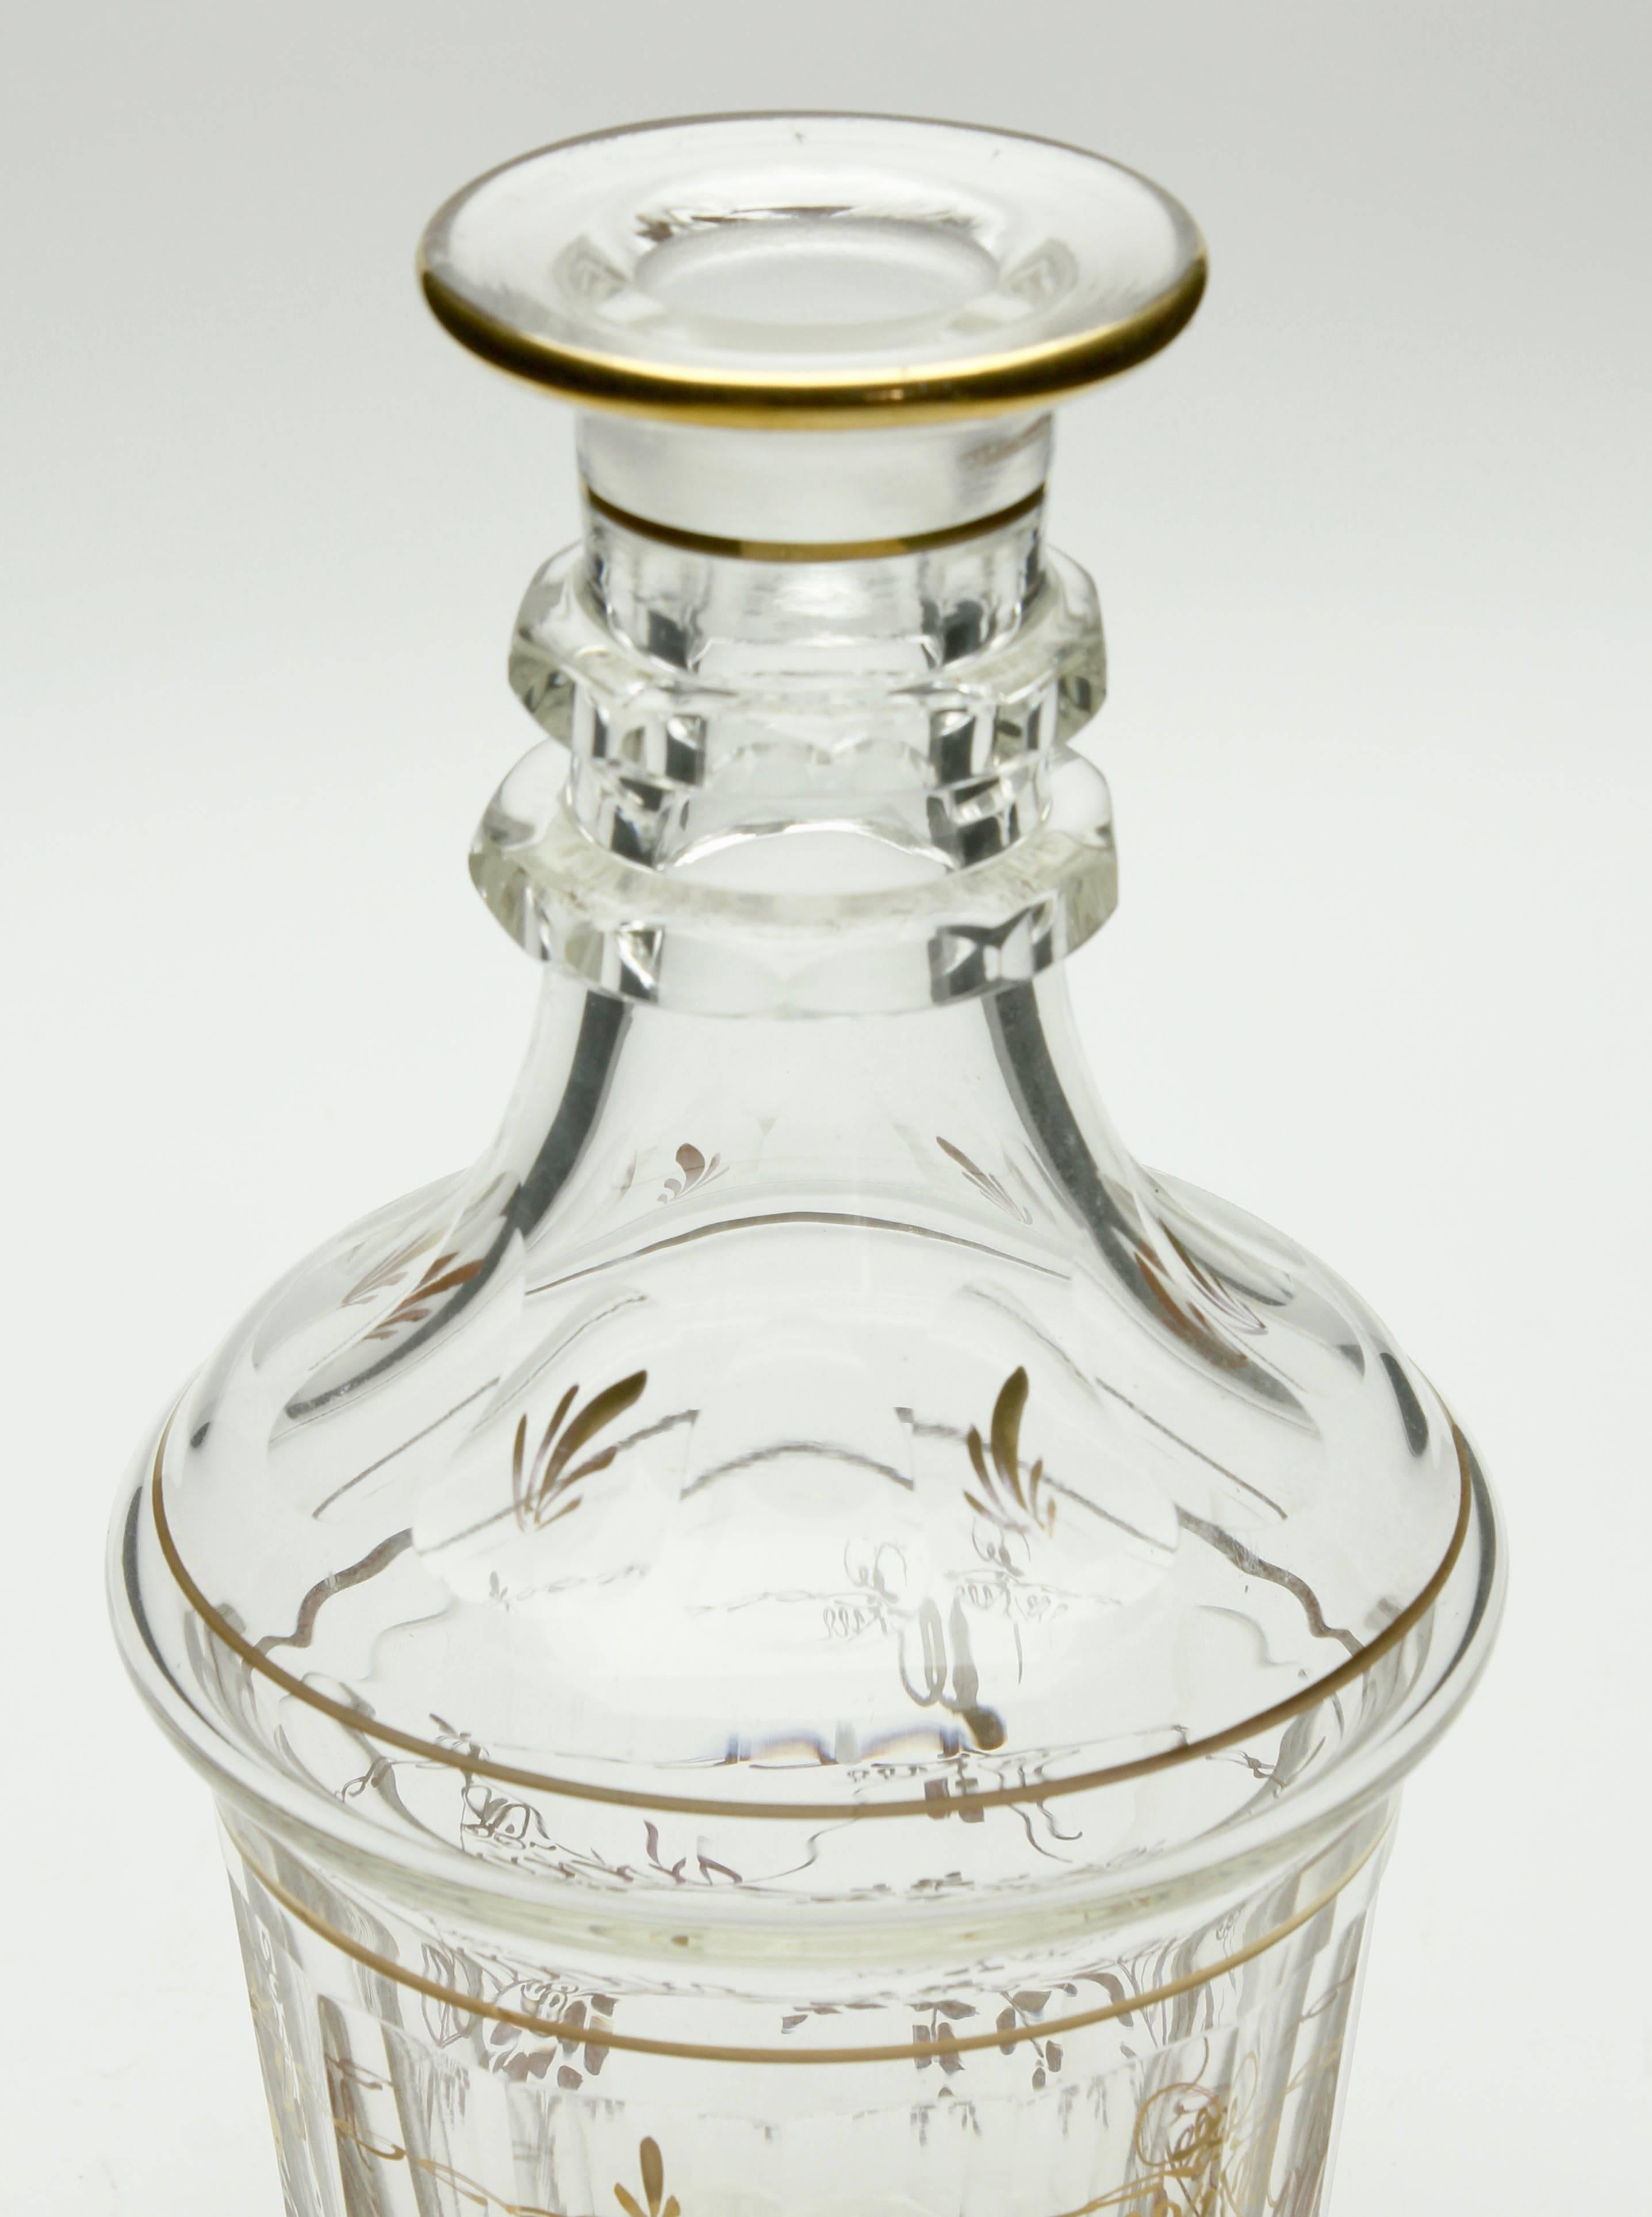 Faceted Georgian Glass Decanter, Two Neck Rings with Gold Decoration, 1840s